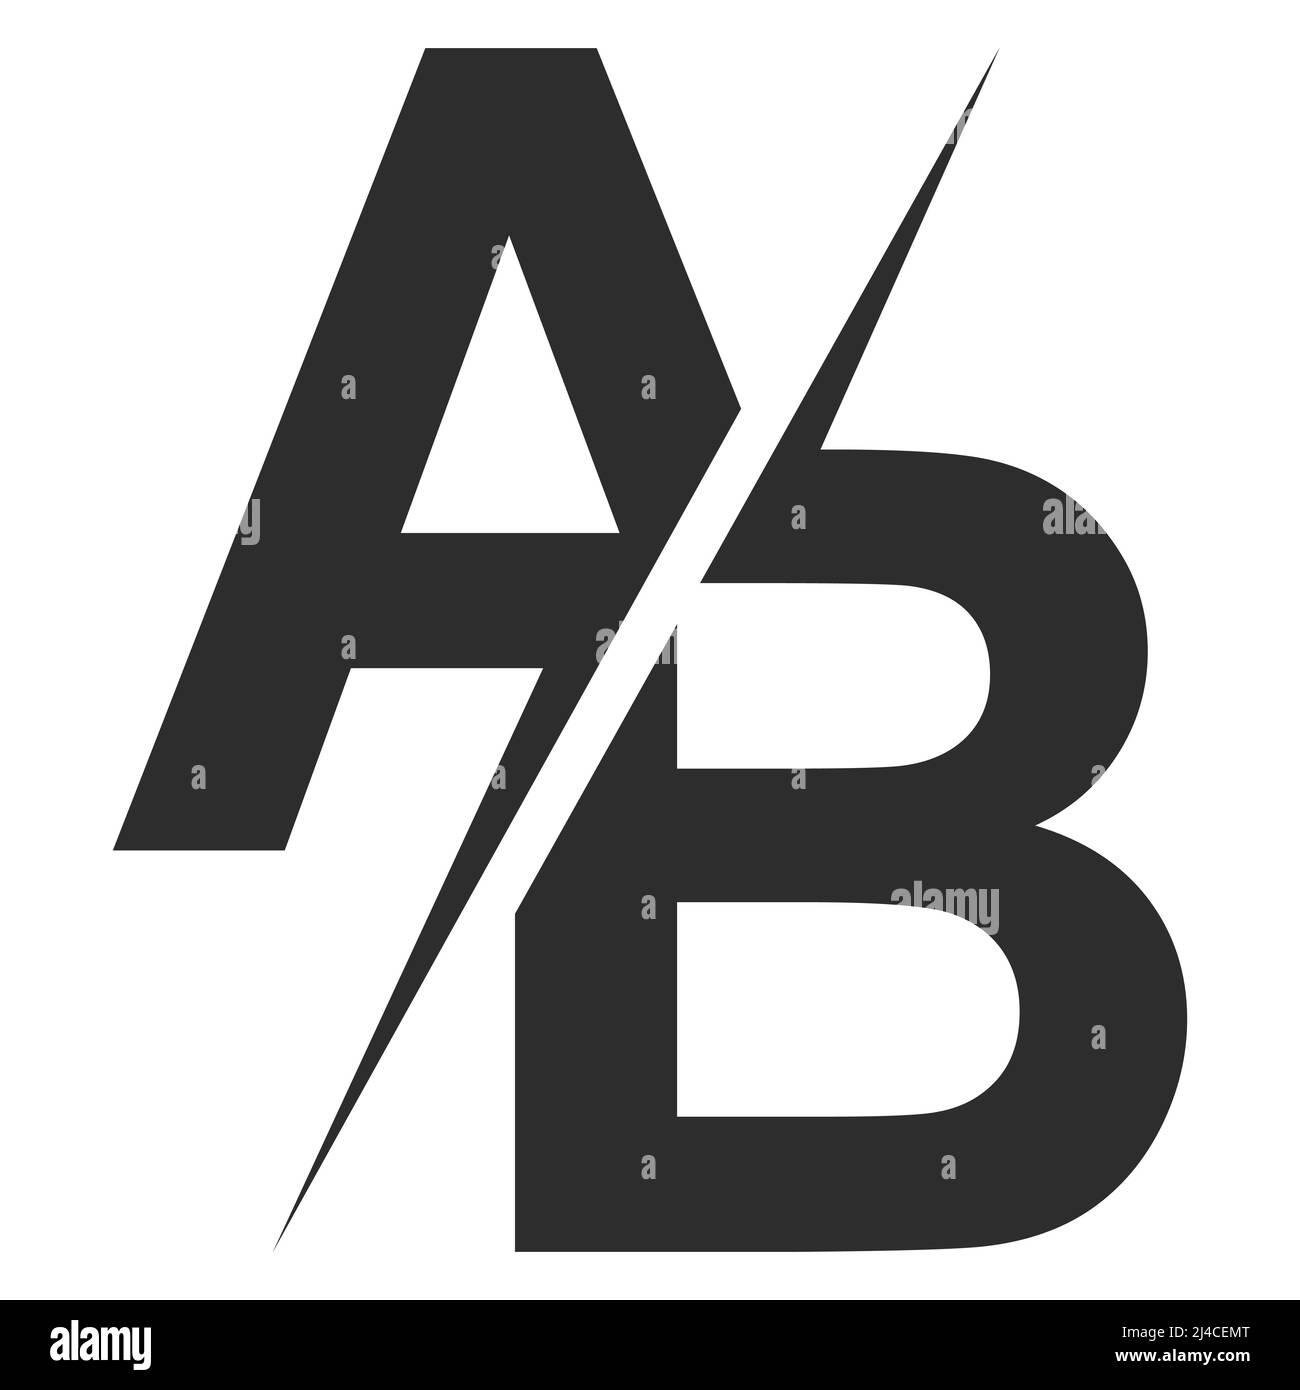 Letters A B ab logo separated diagonally by lightning strike, a versus vs b ab Stock Vector